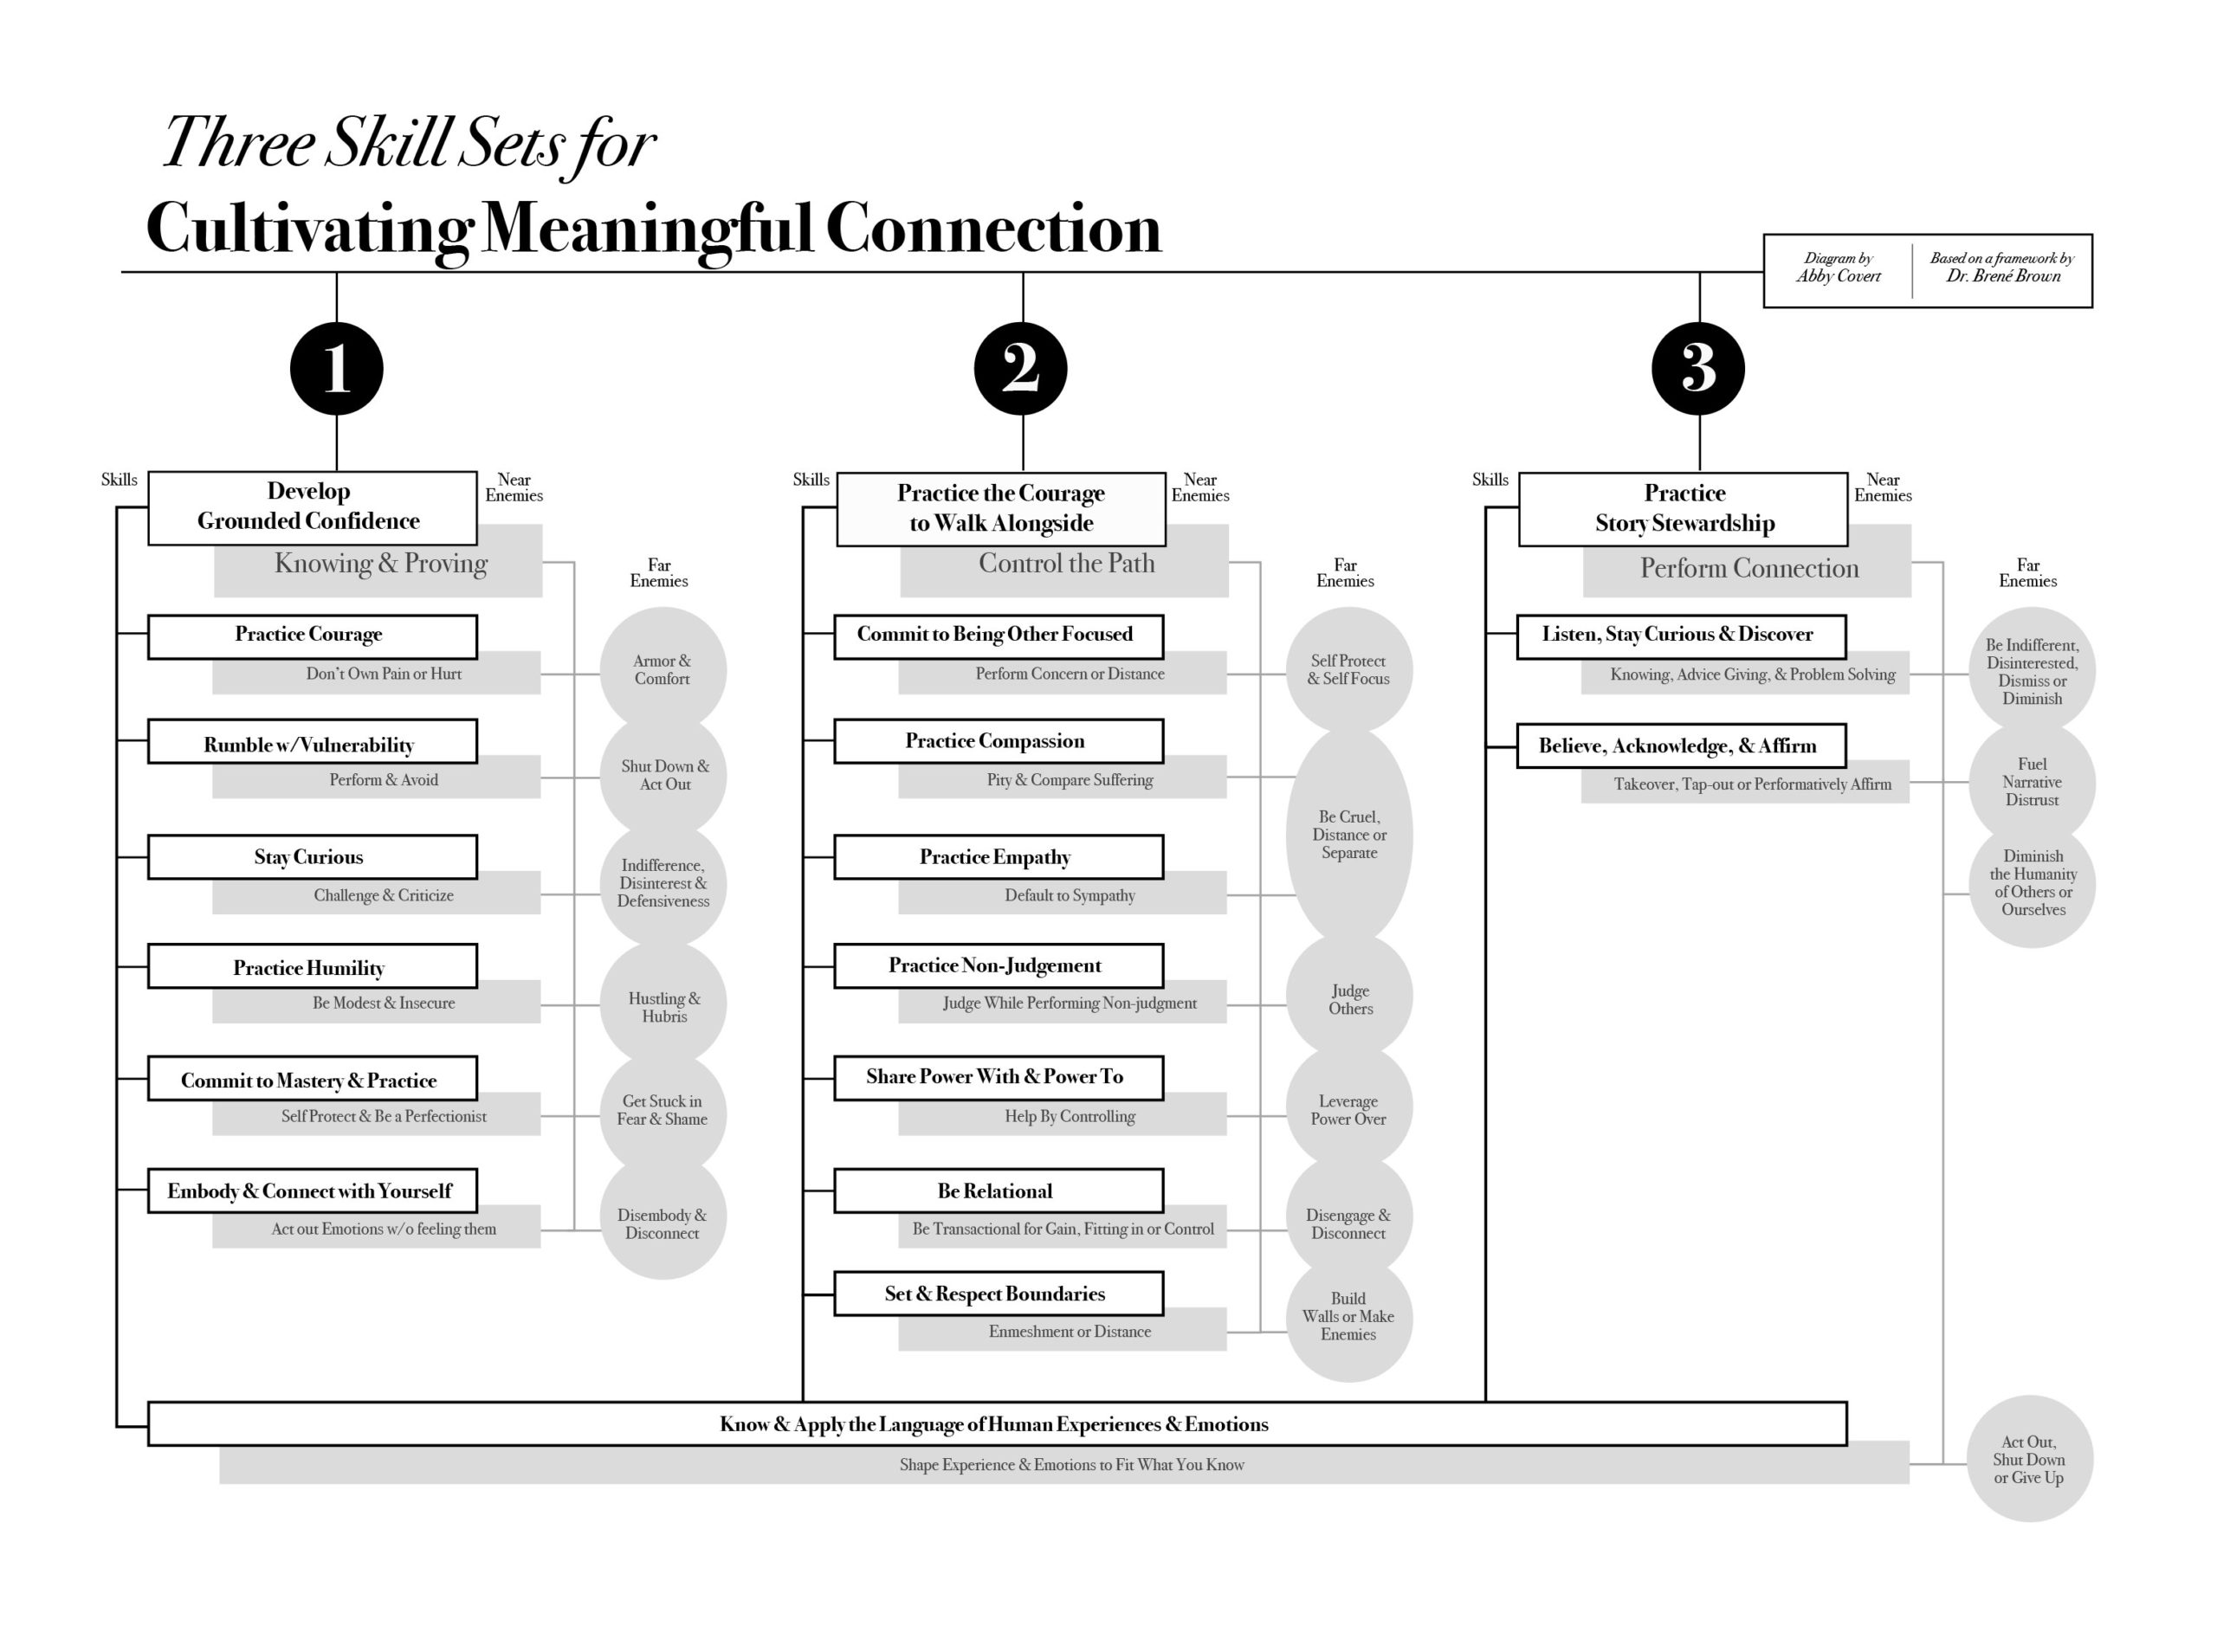 A hierarchy diagram of the skills within each of three skillsets for cultivating meaningful connection. Based on the work of Dr. Brene Brown.